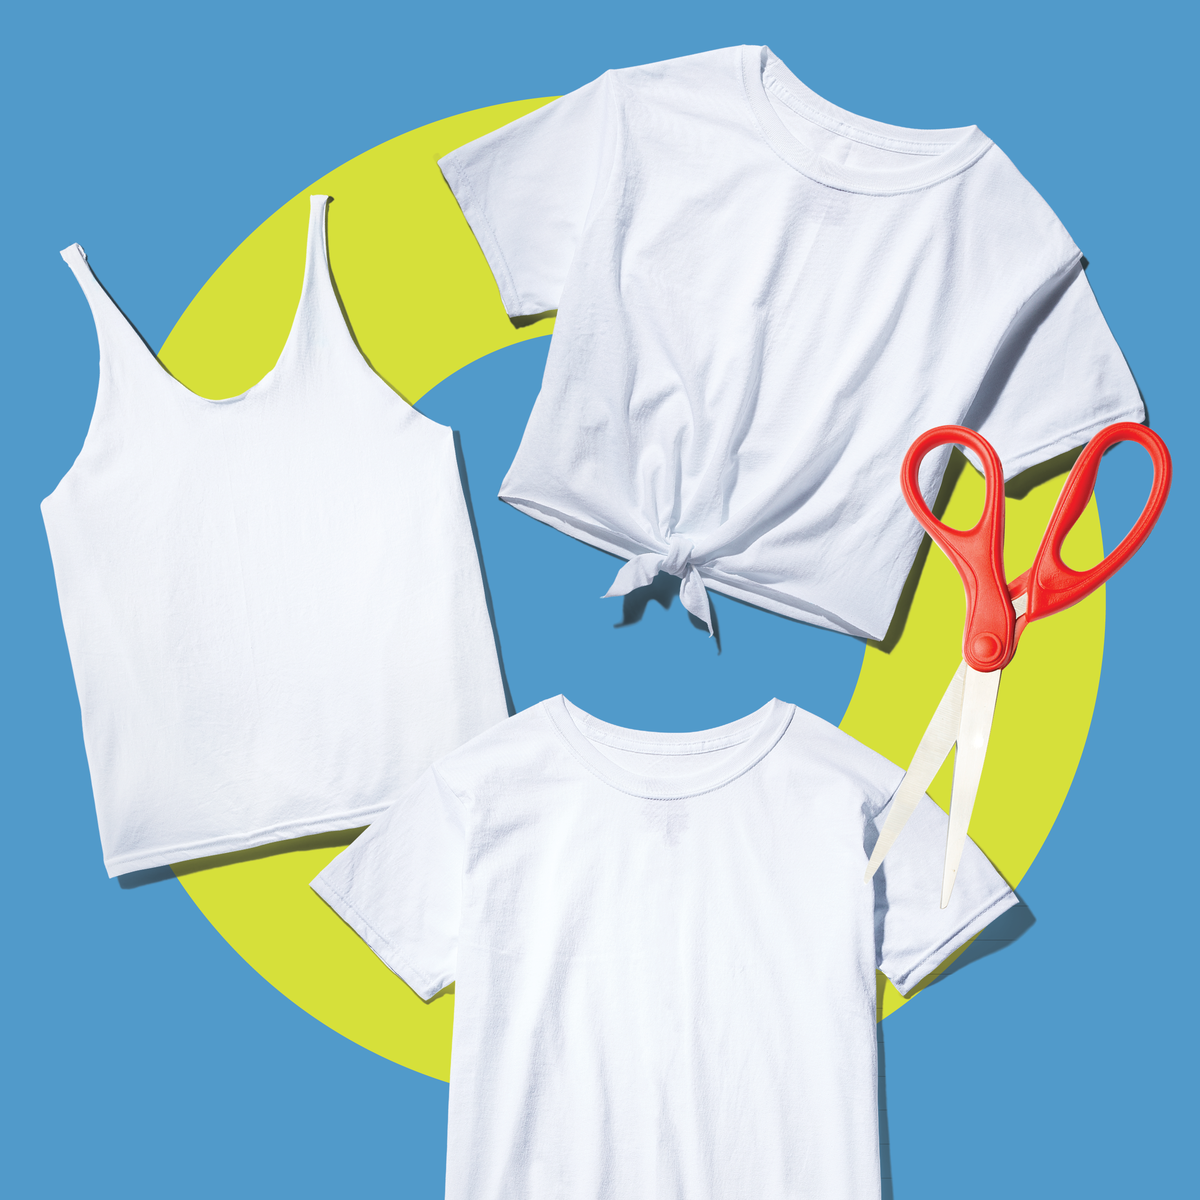 How to Turn T Shirt Into Crop Gym Top?